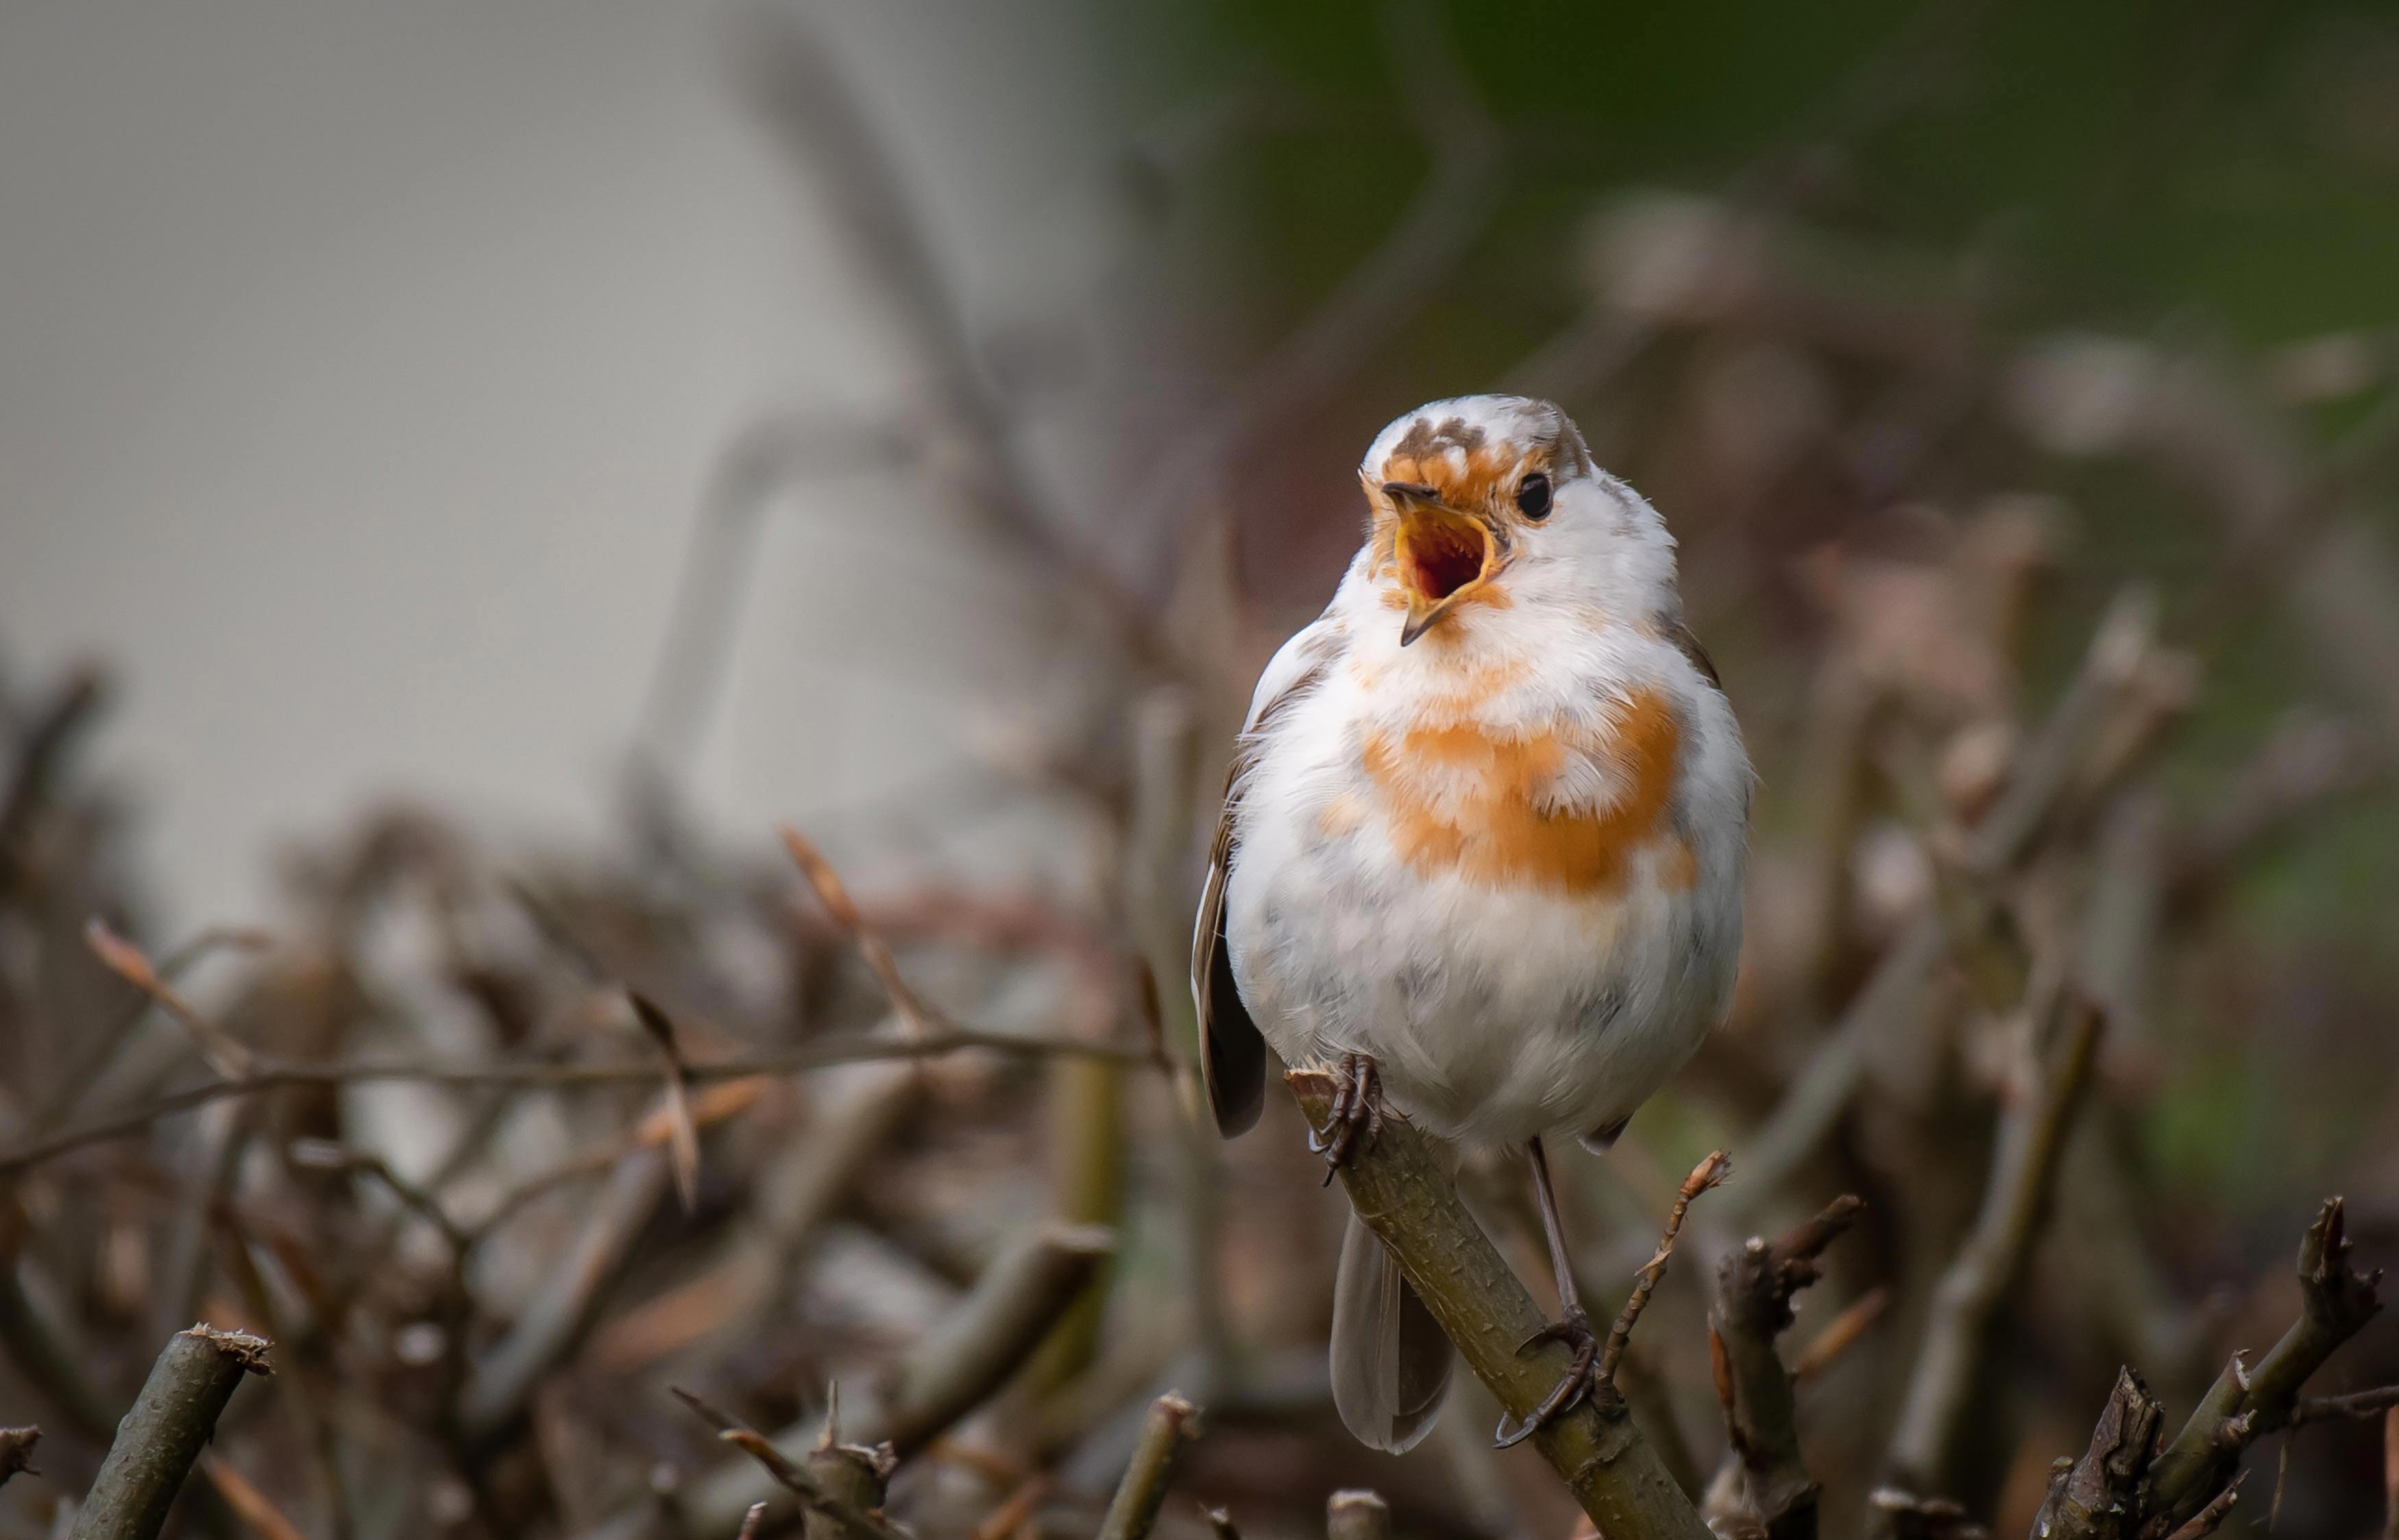 A leucistic robin with its mouth open.